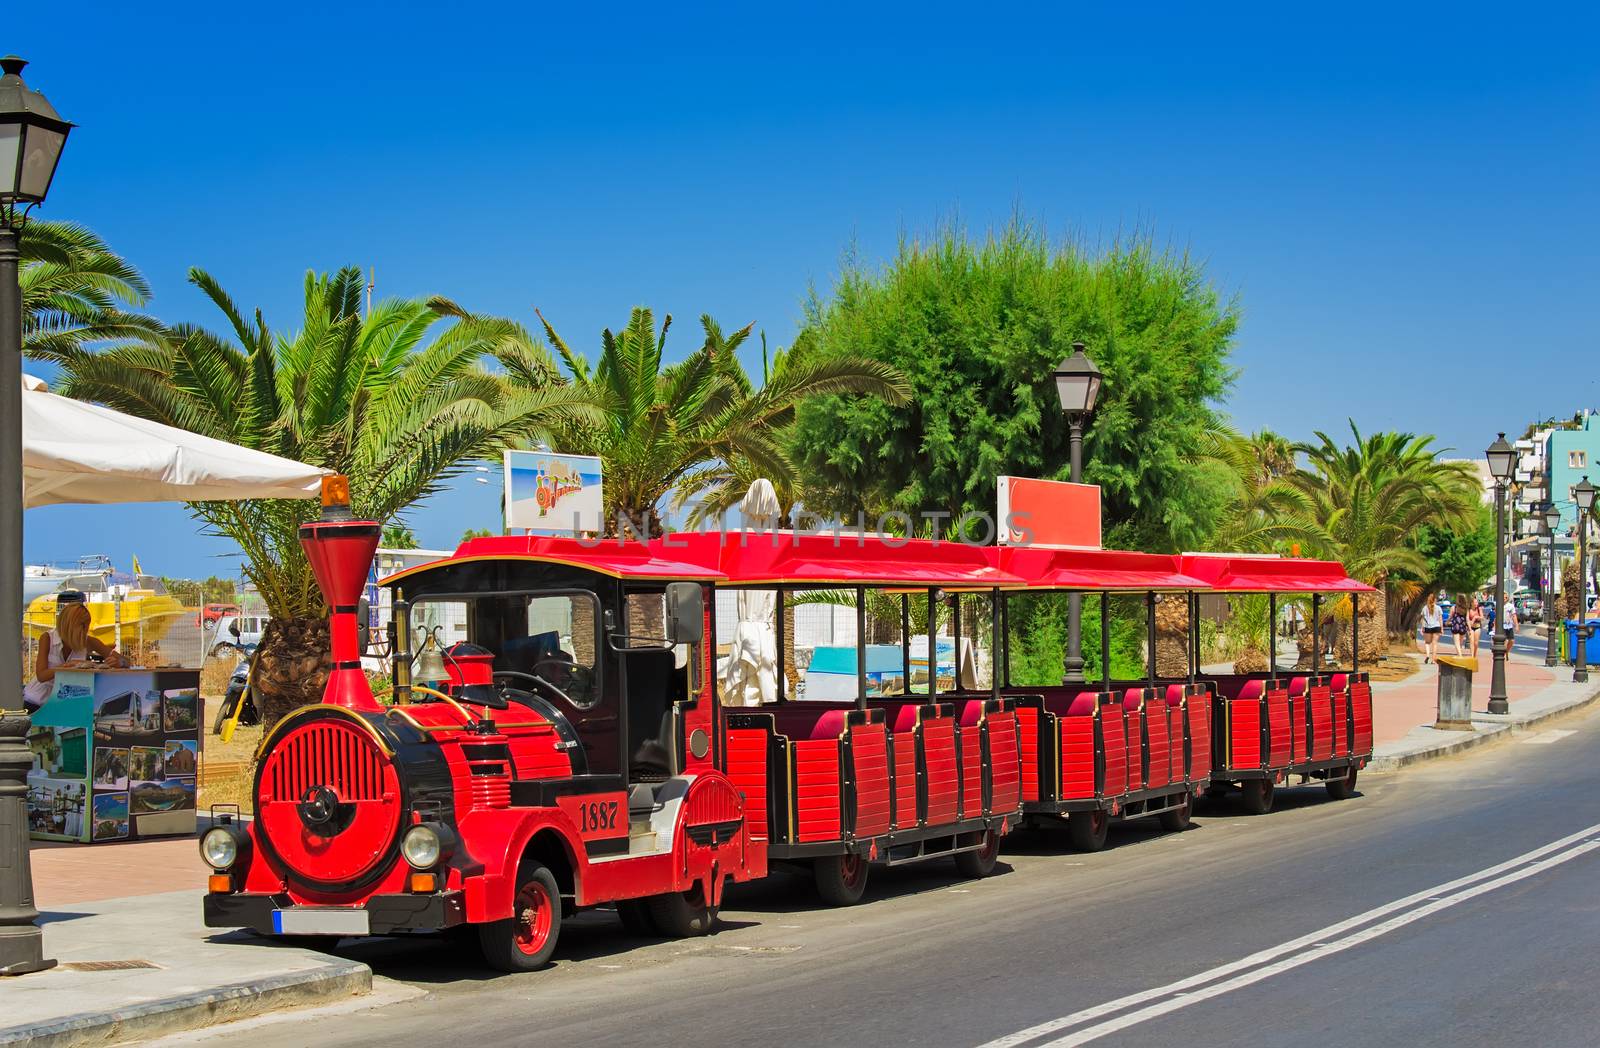 Bright red car in the style of an old steam train with open cars in the resort town for the transportation of tourists.